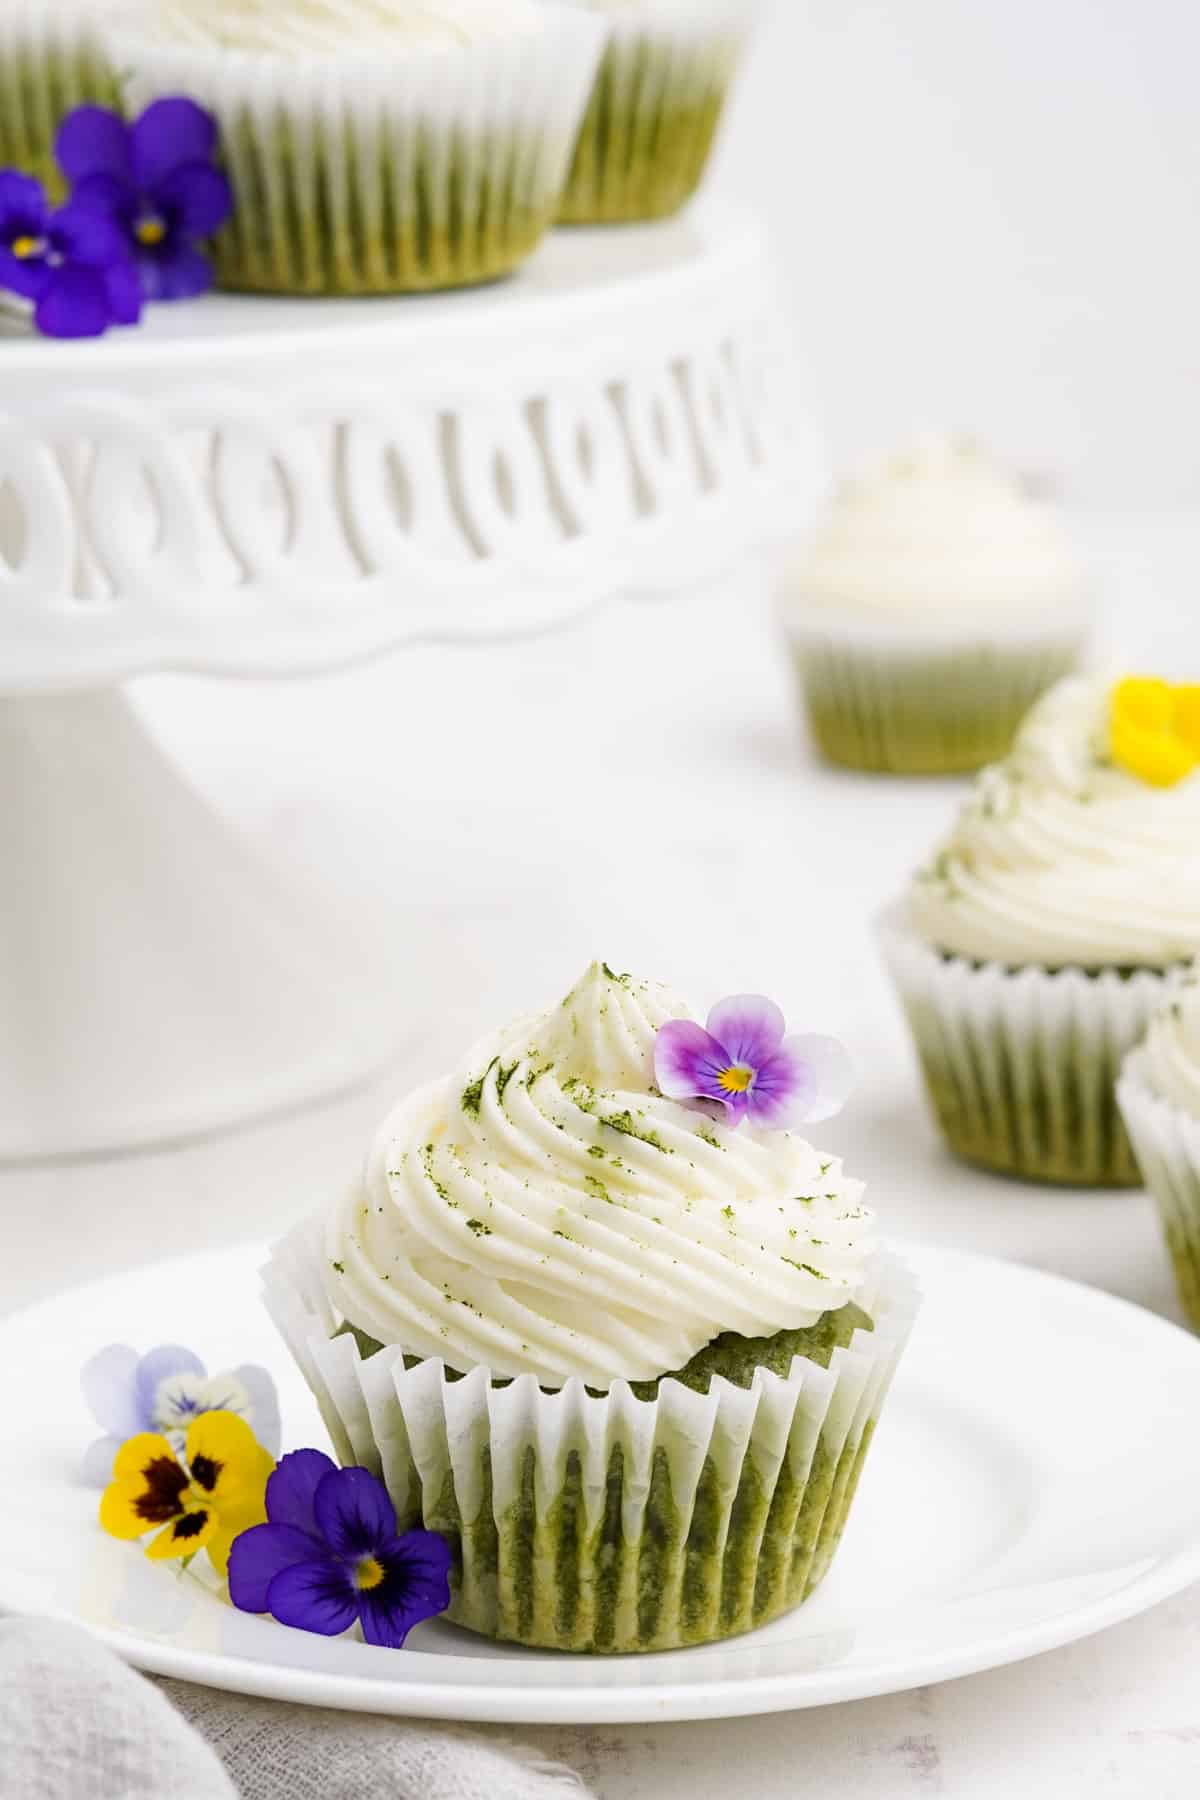 Green cupcake with white frosting on a white plate.